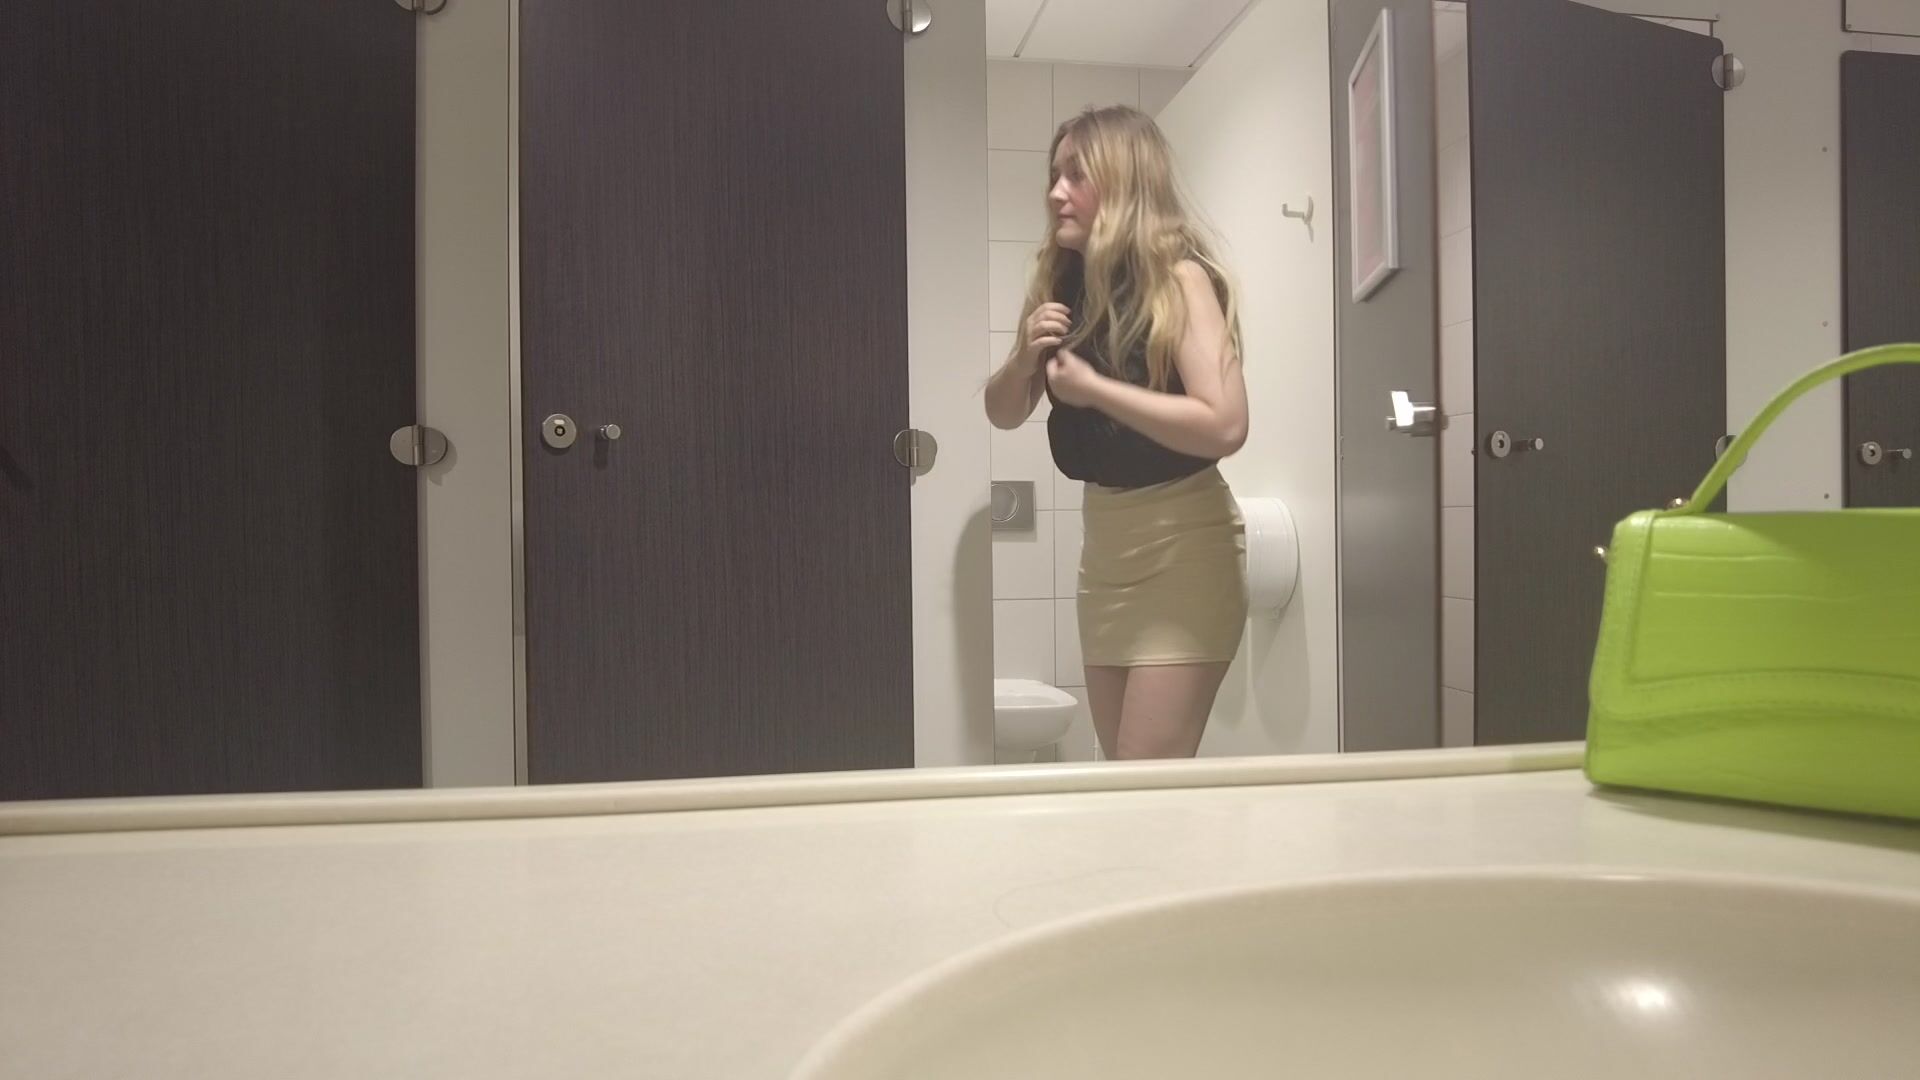 louiselittlefrench naked in public store bathroom